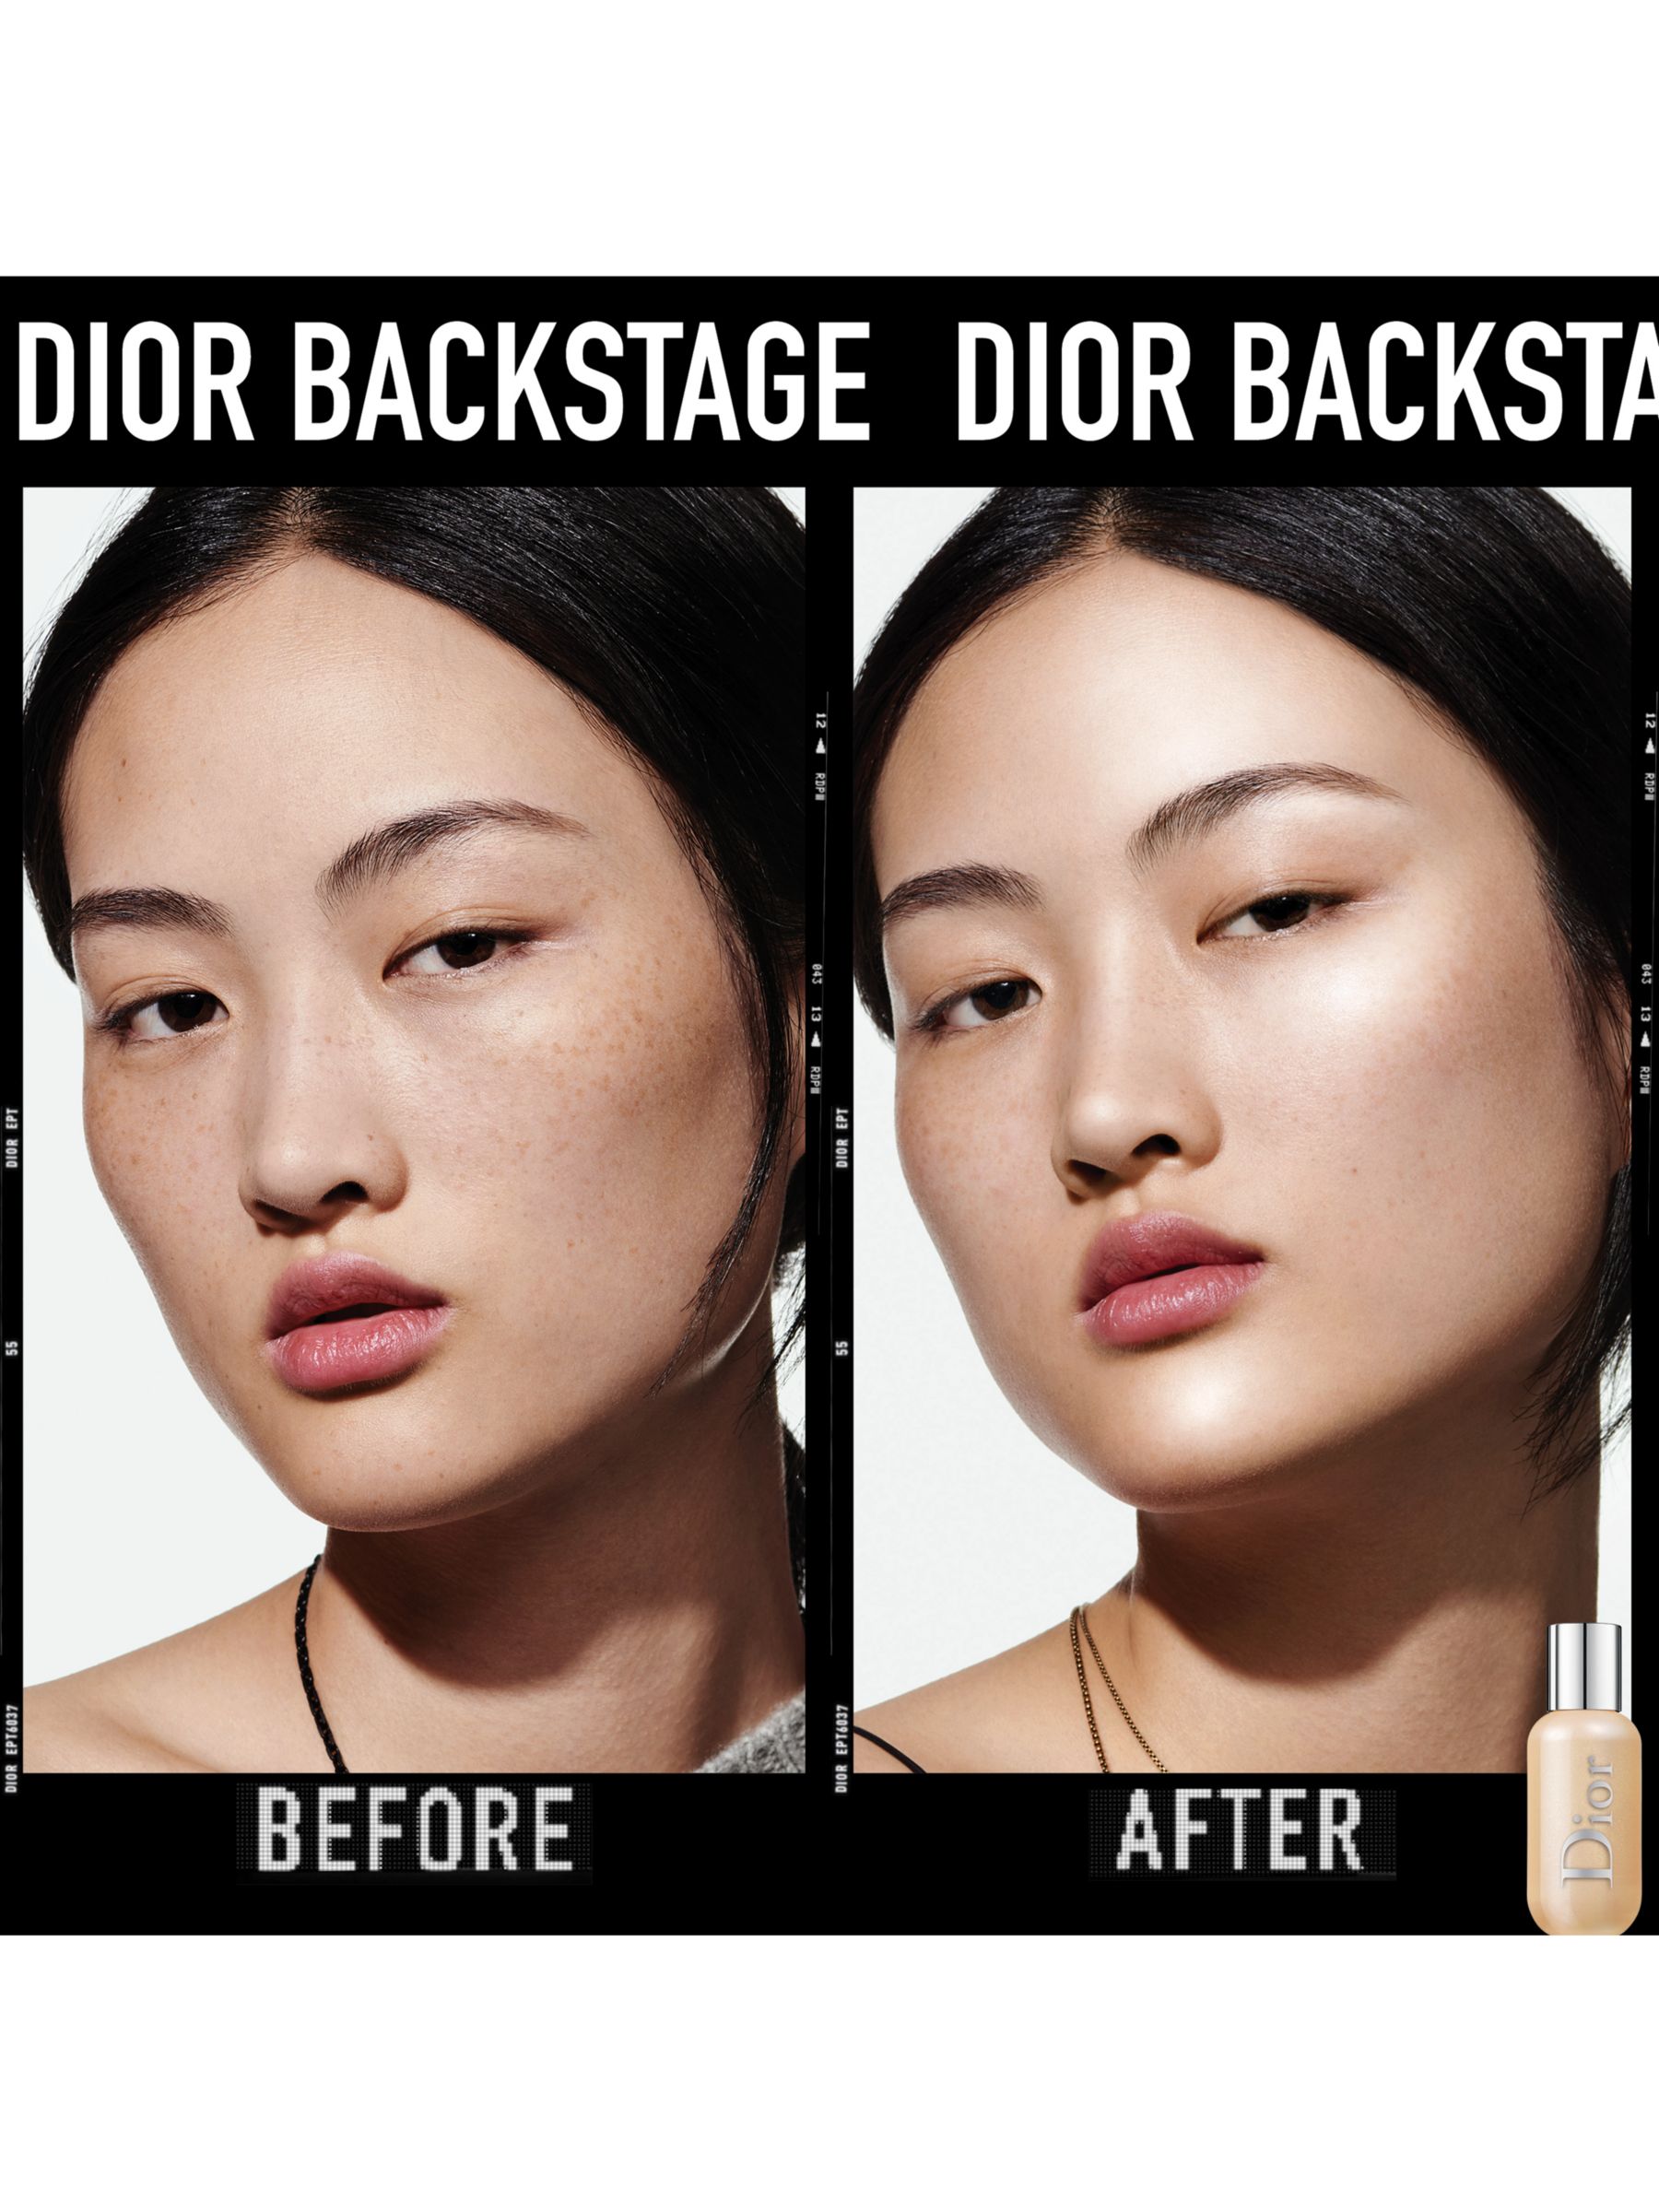 dior face and body review